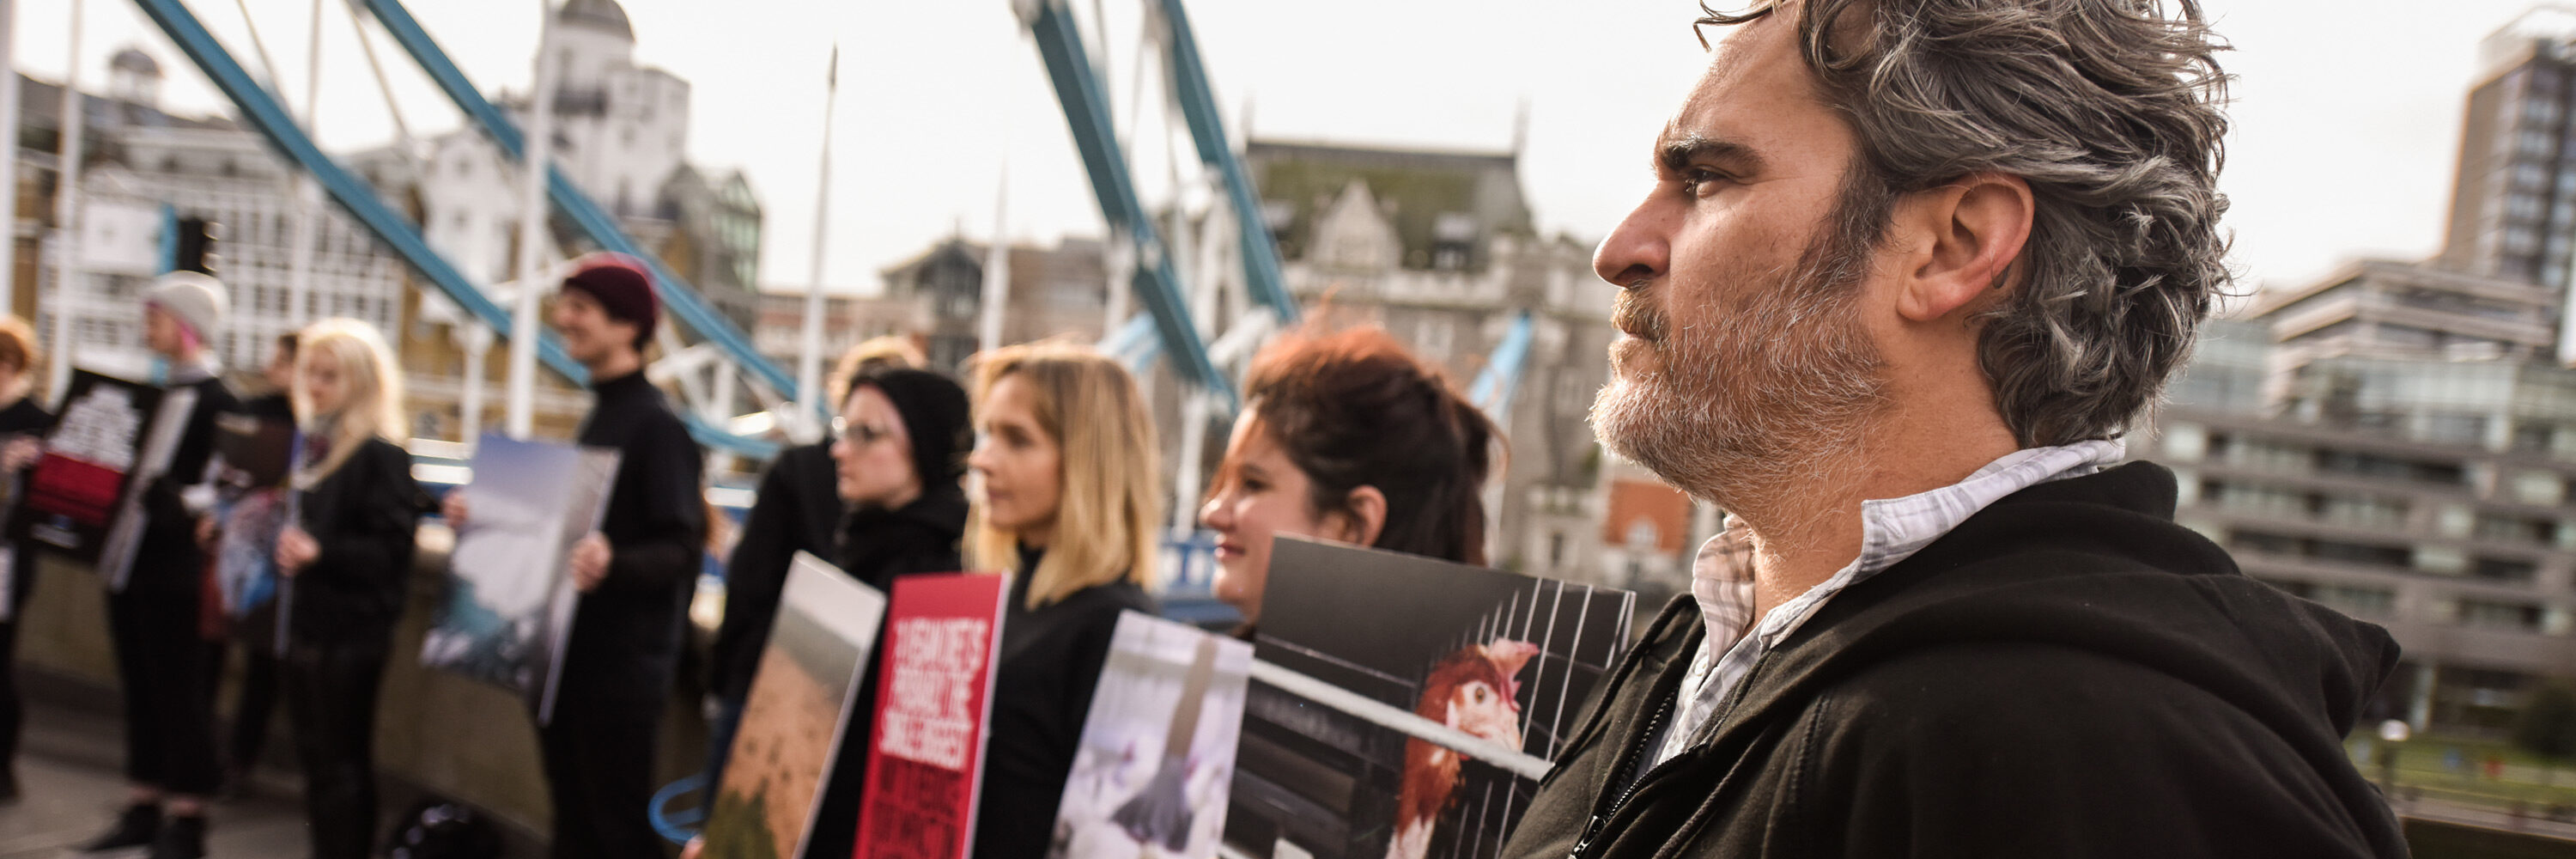 Joaquin Phoenix protests animal cruelty with Animal Equality supporters in London